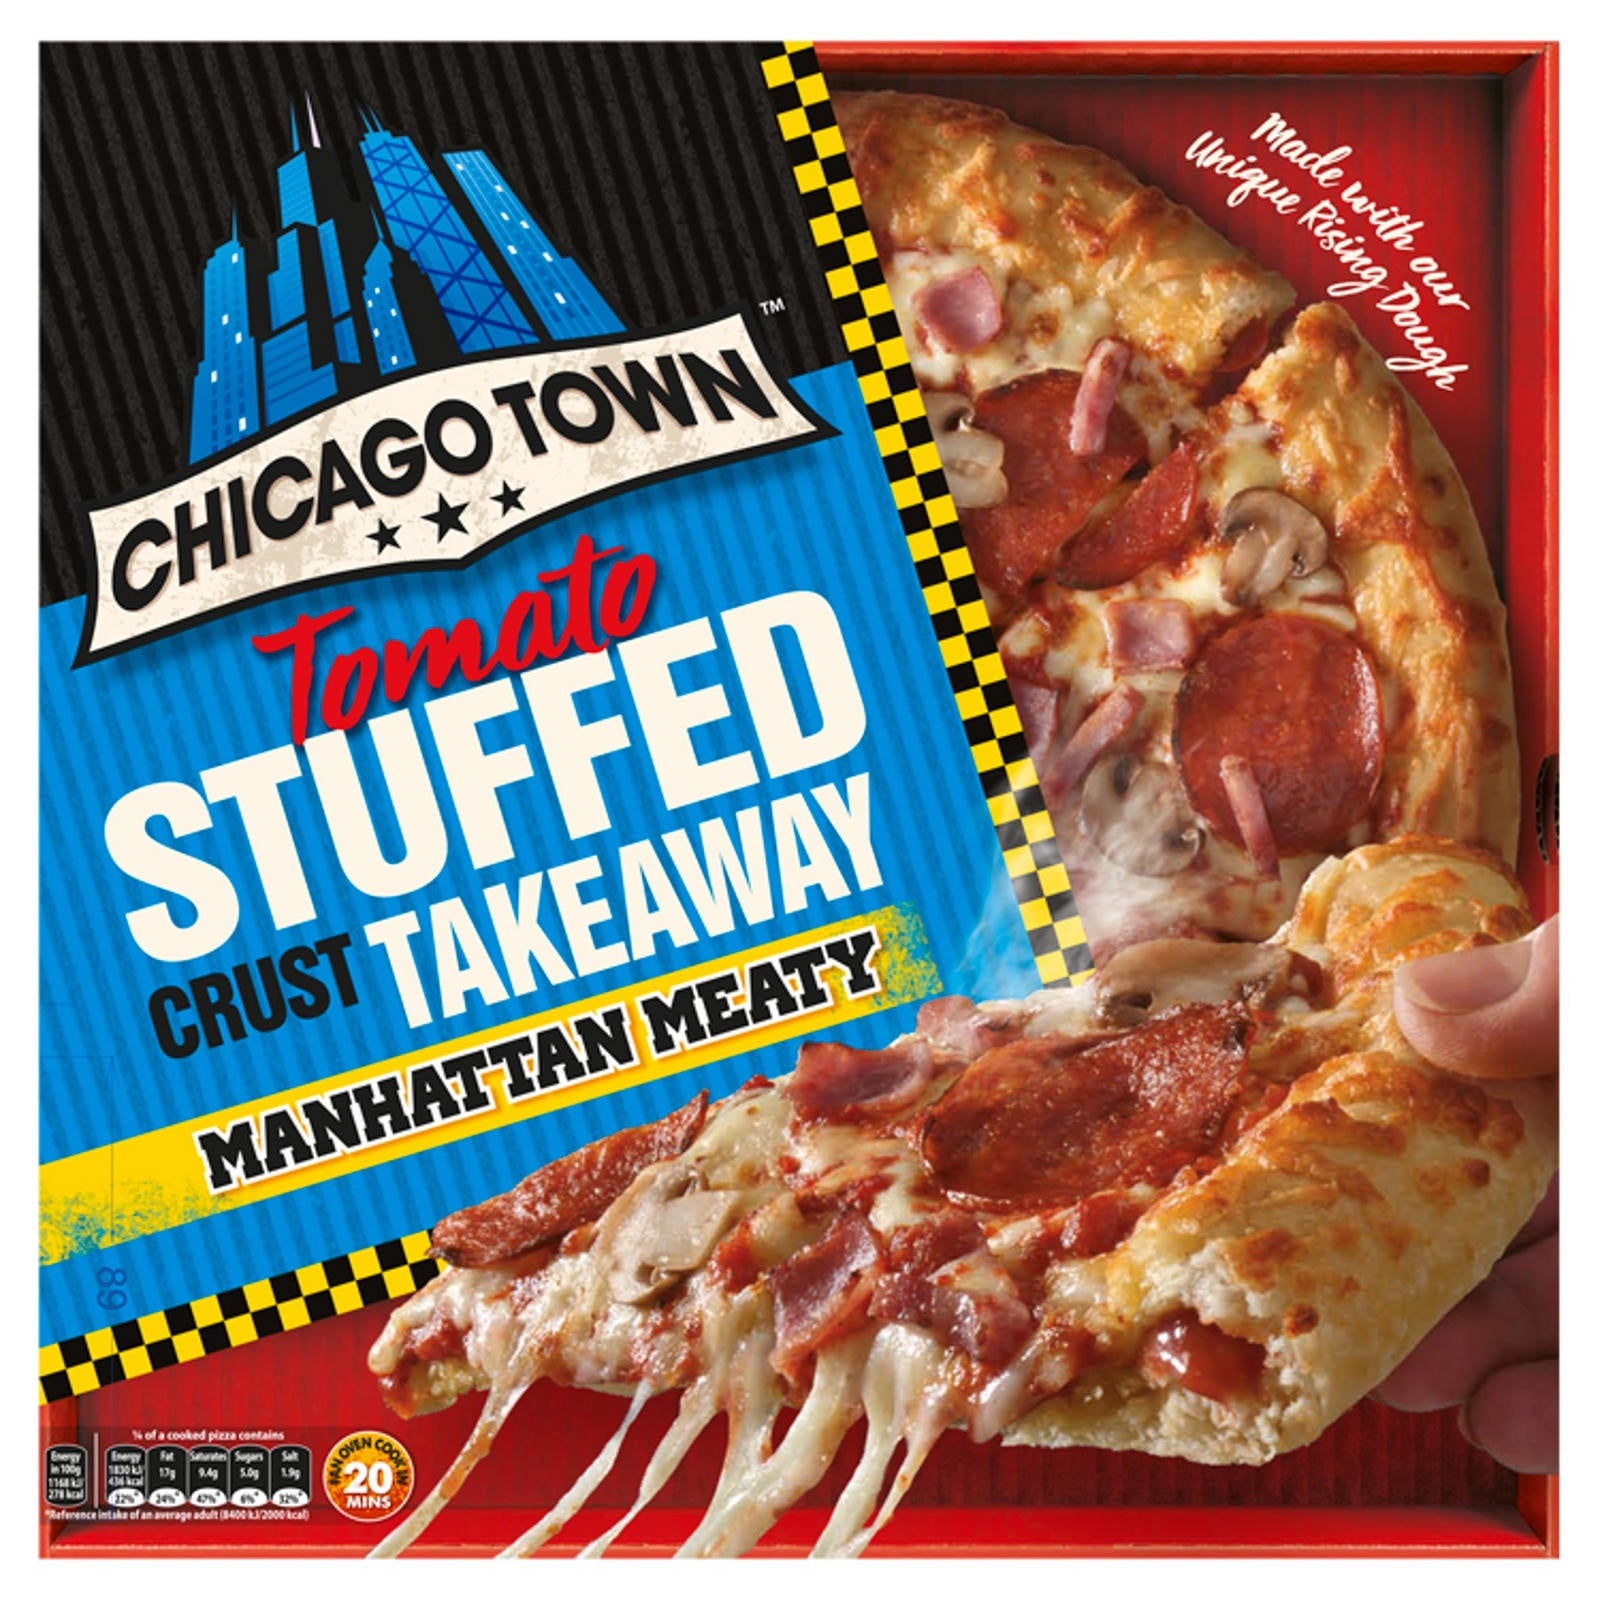 Chicago Town S/C Manhattan Meaty Large Pizza